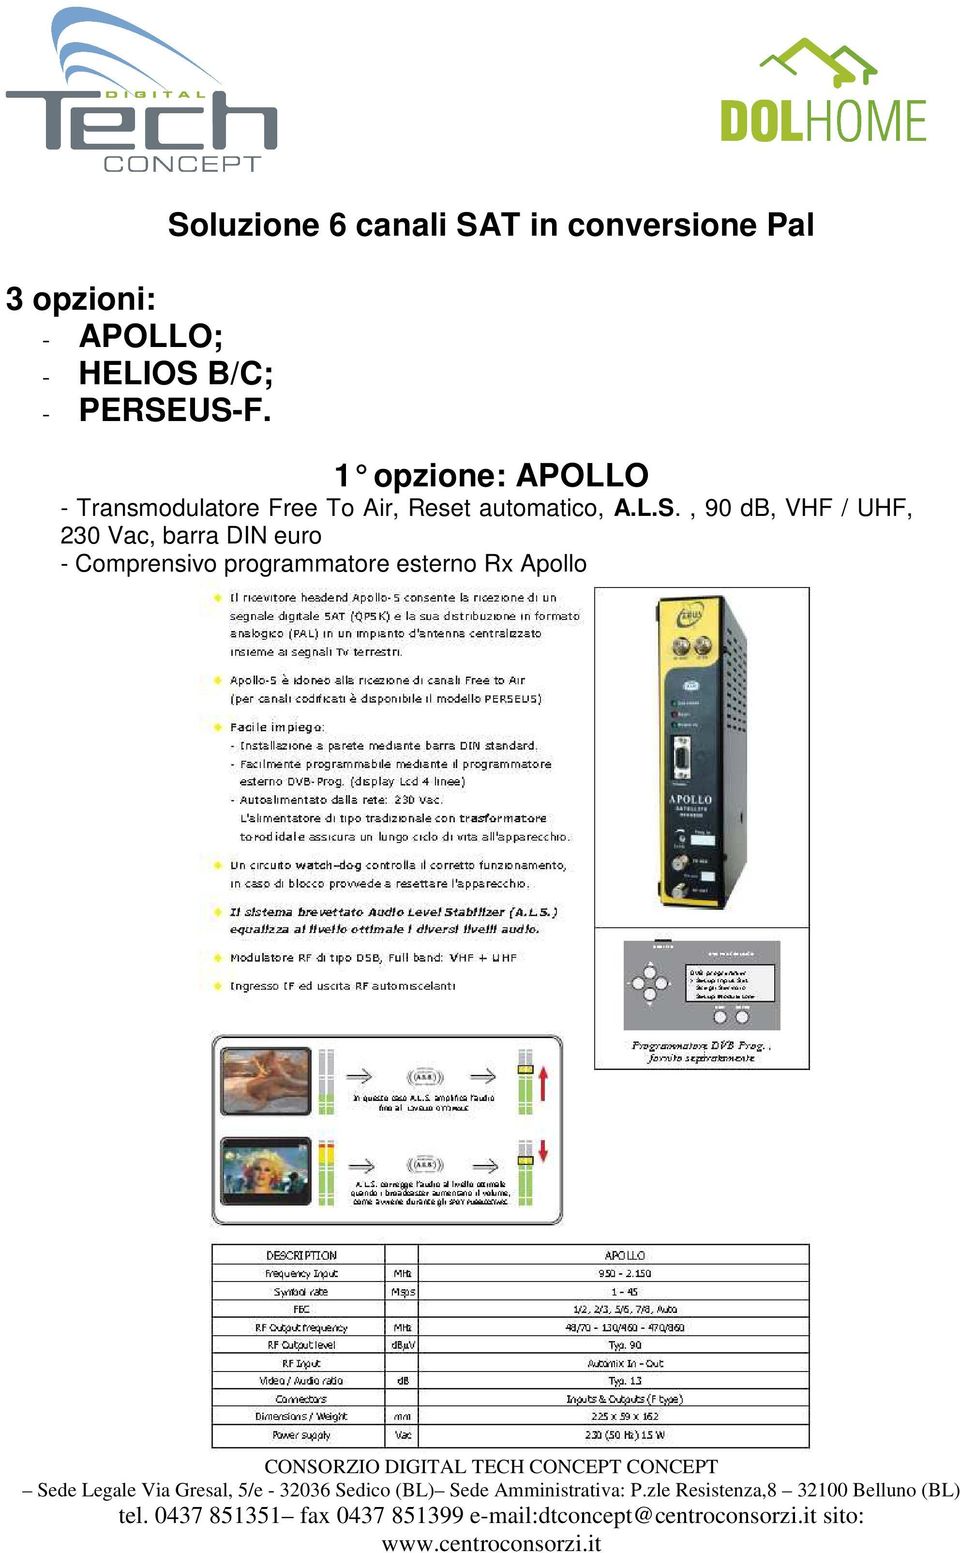 Transmodulatore Free To Air, Reset automatico, A.L.S.